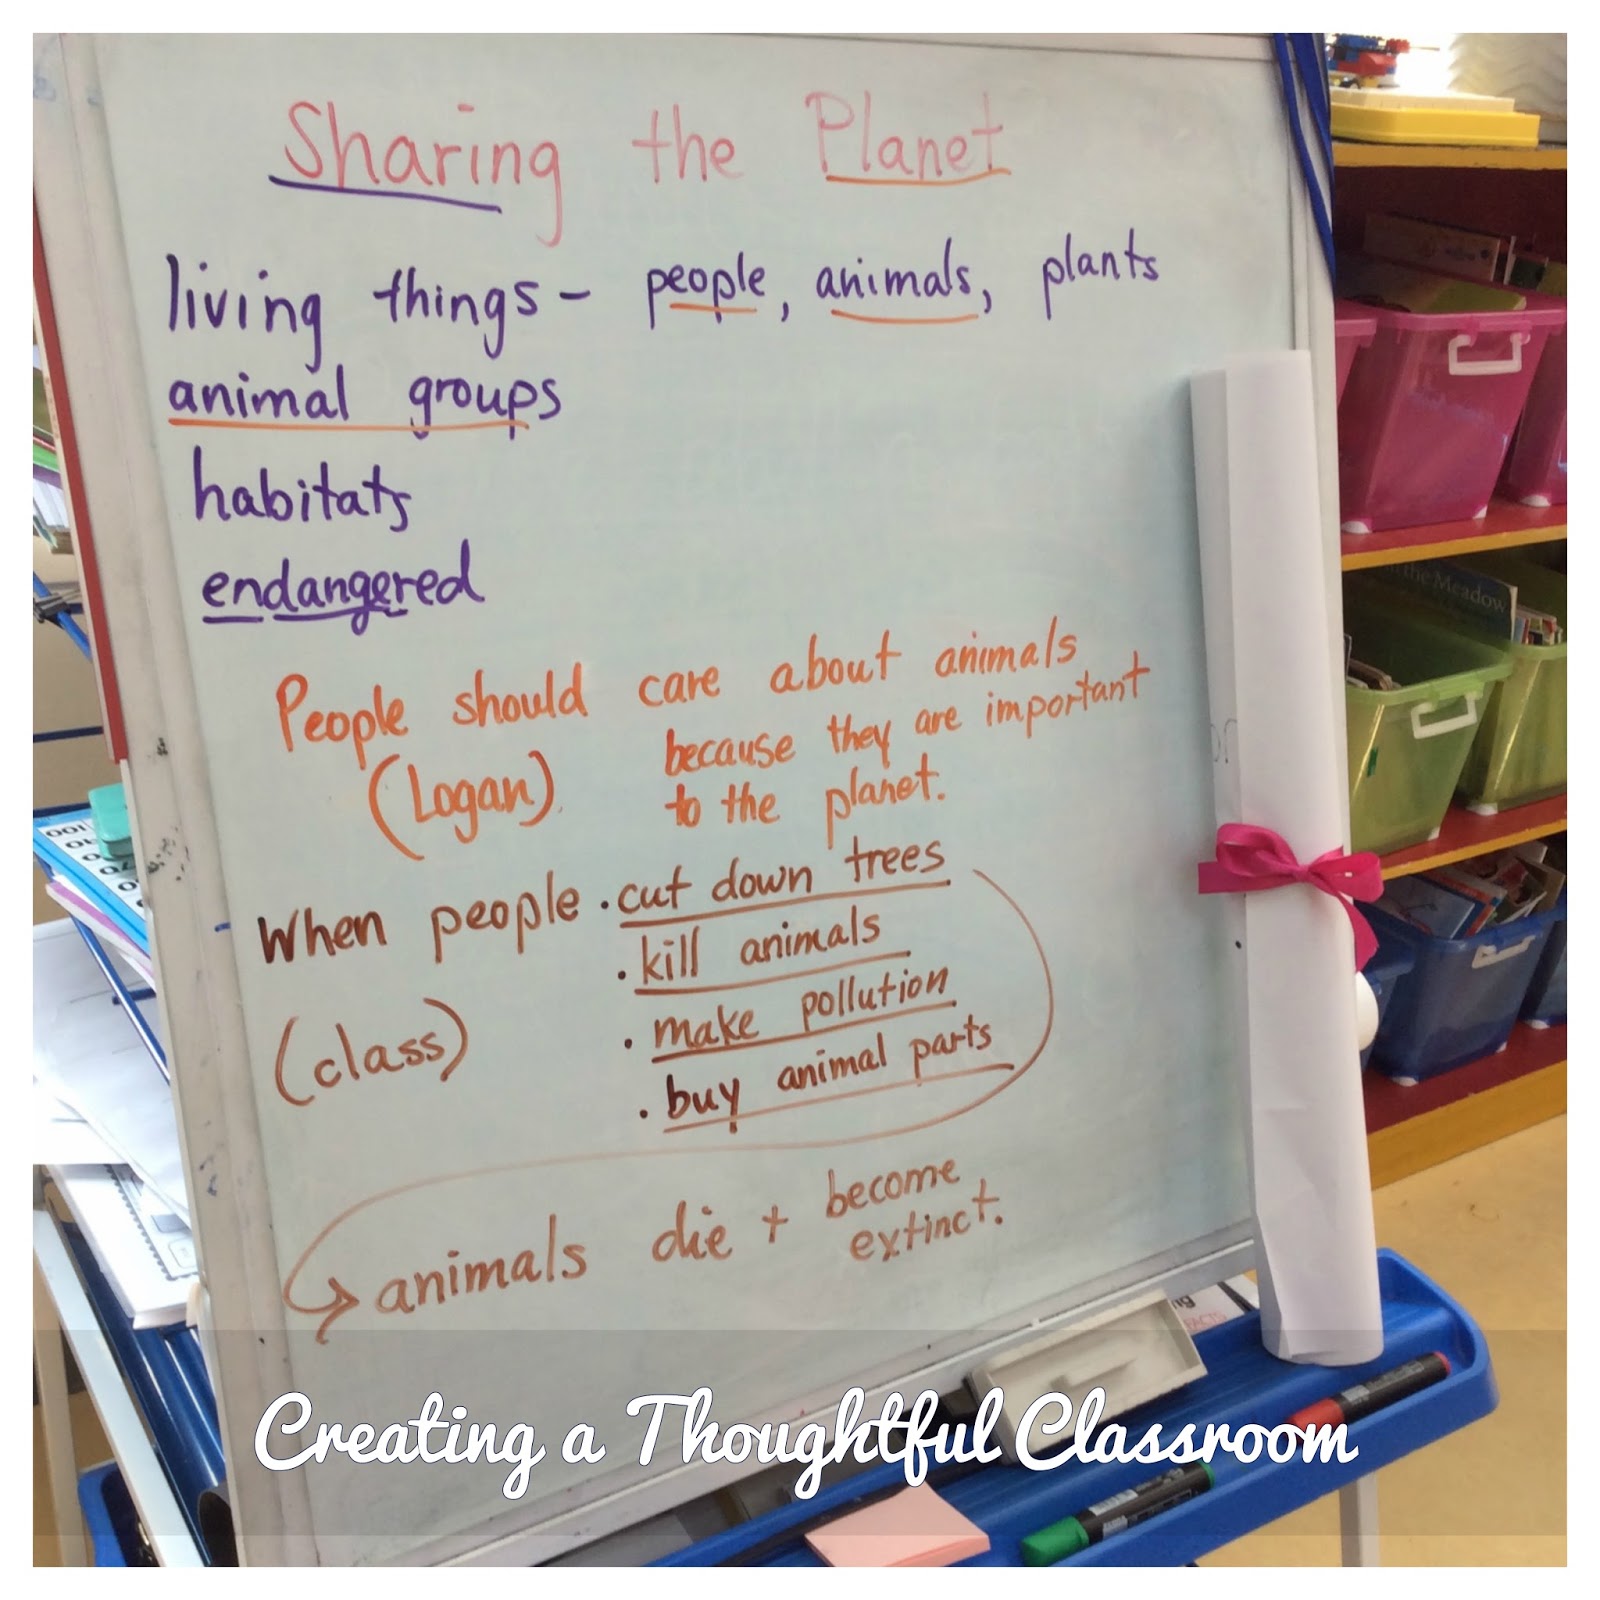 Revealing the Central Idea - Creating a Thoughtful Classroom